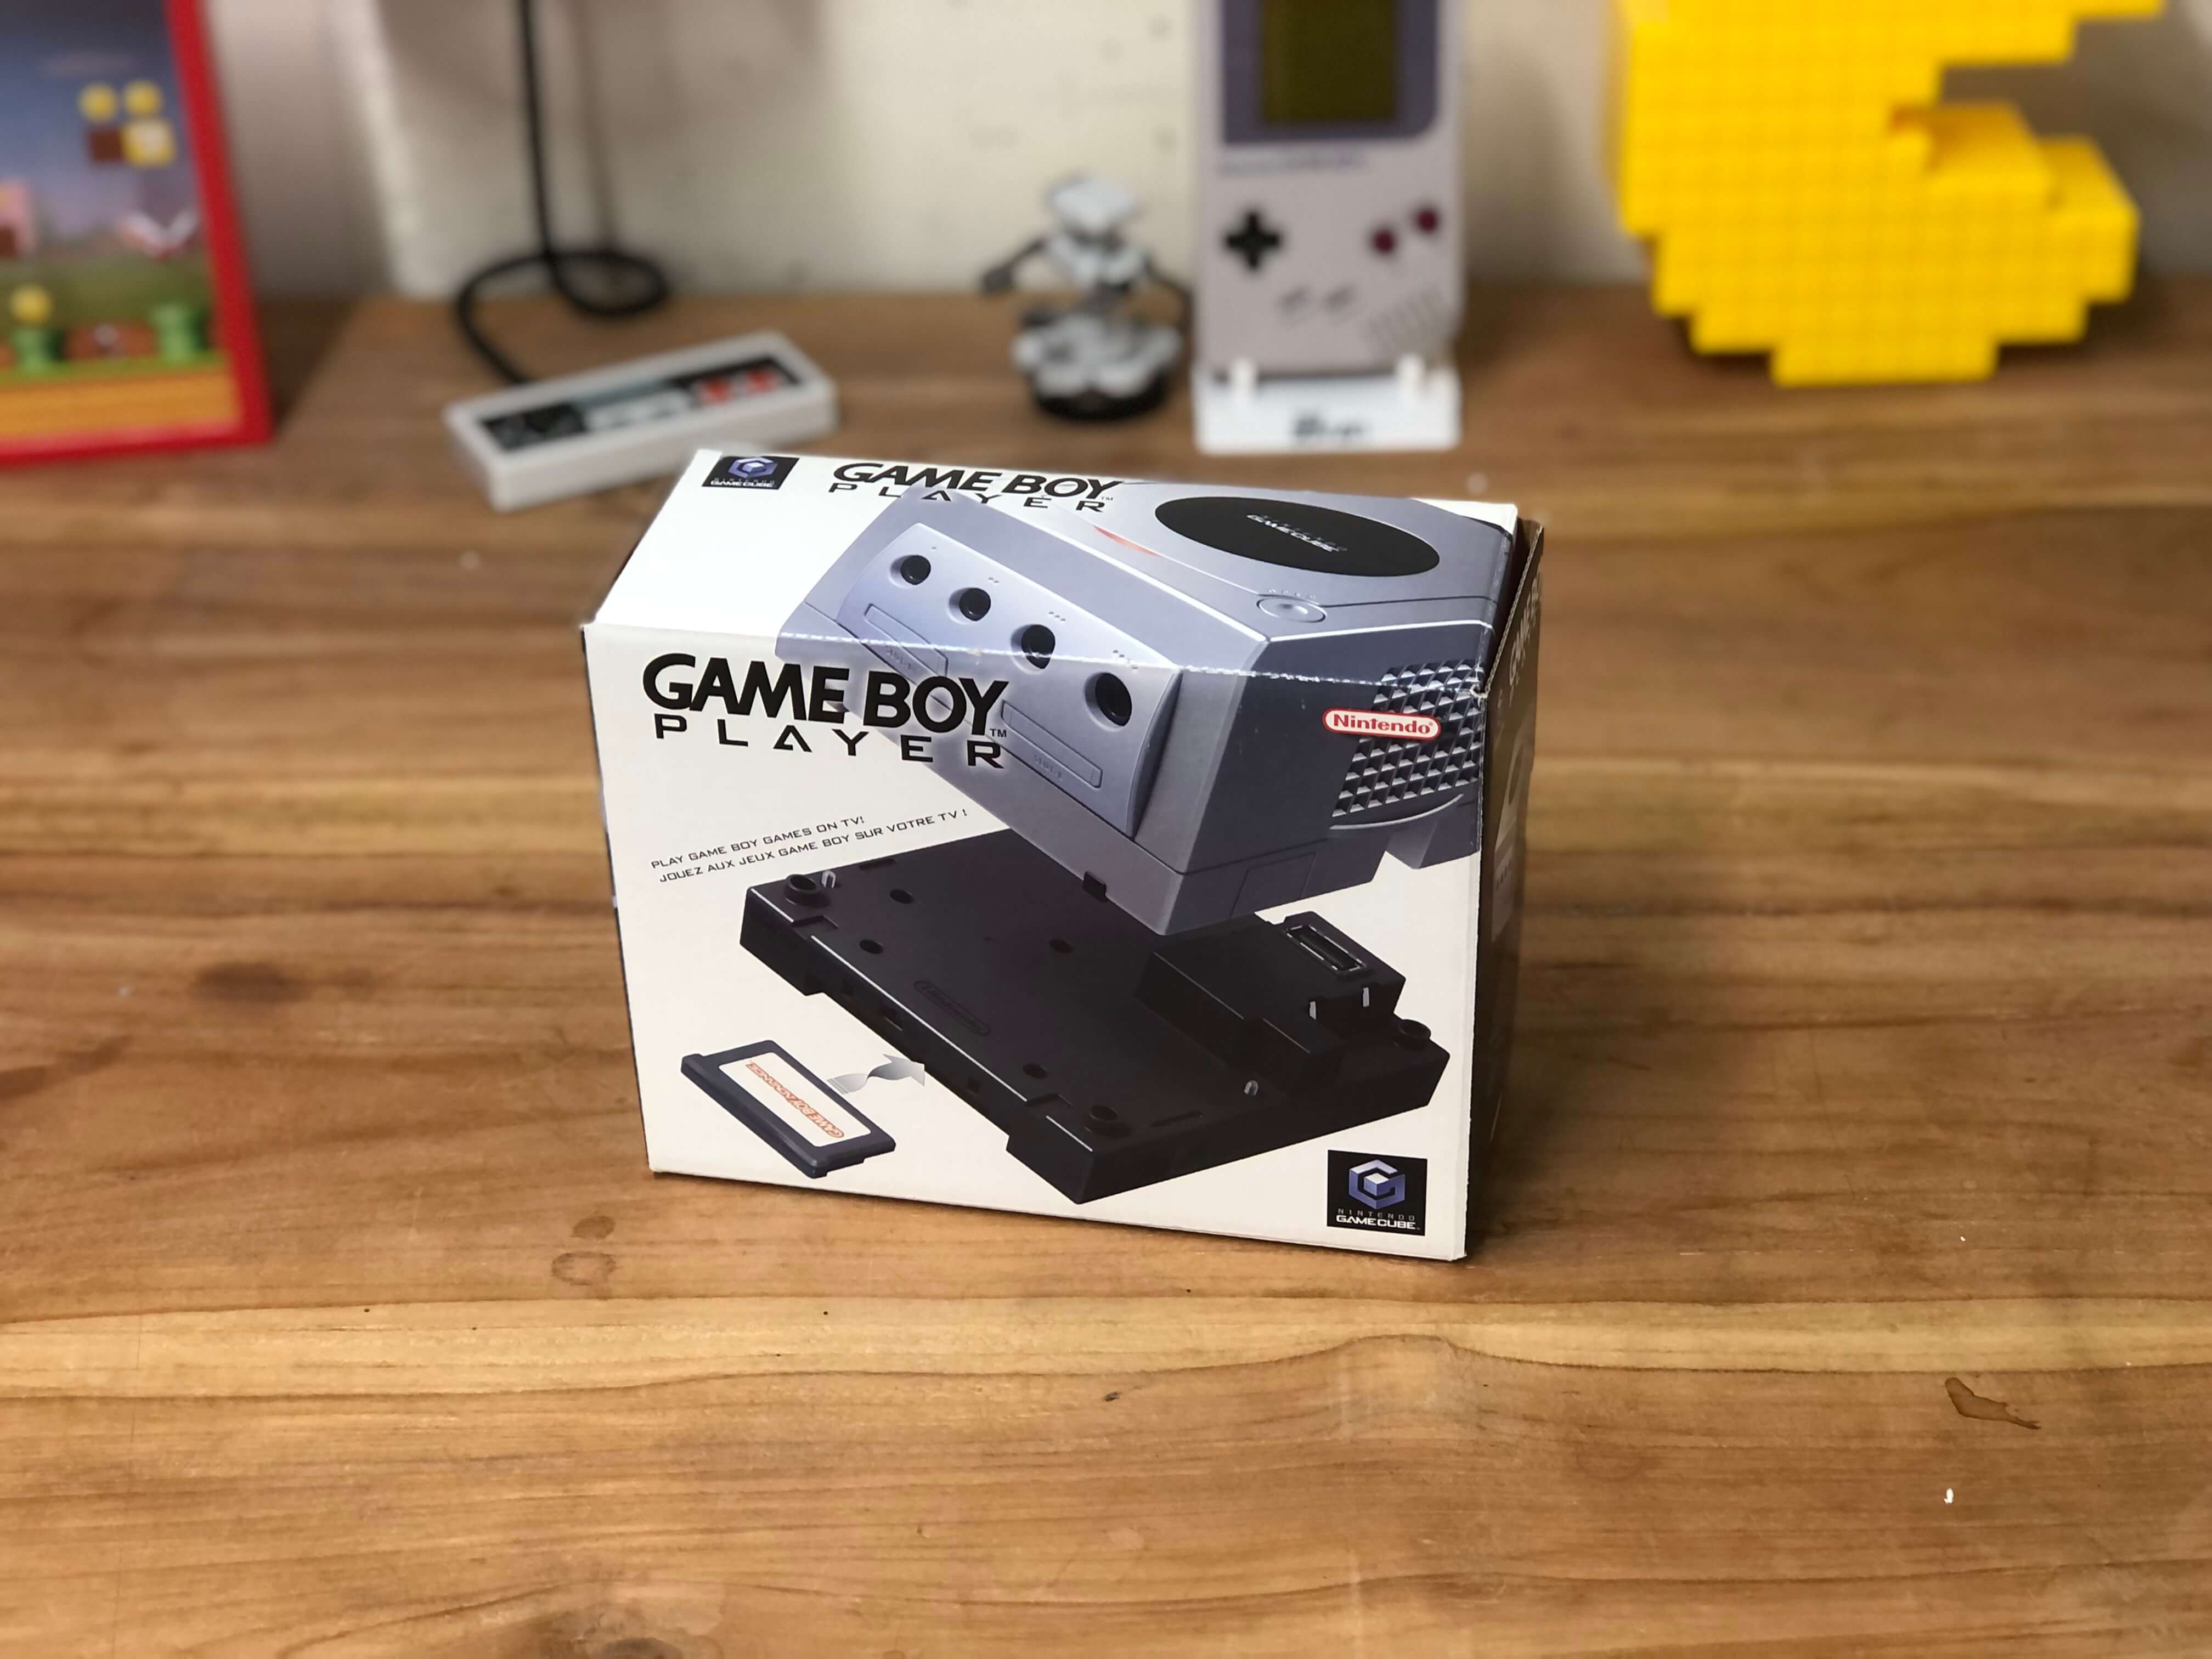 Nintendo Gamecube Gameboy Player [With Disc] [Complete] - Gamecube Hardware - 3